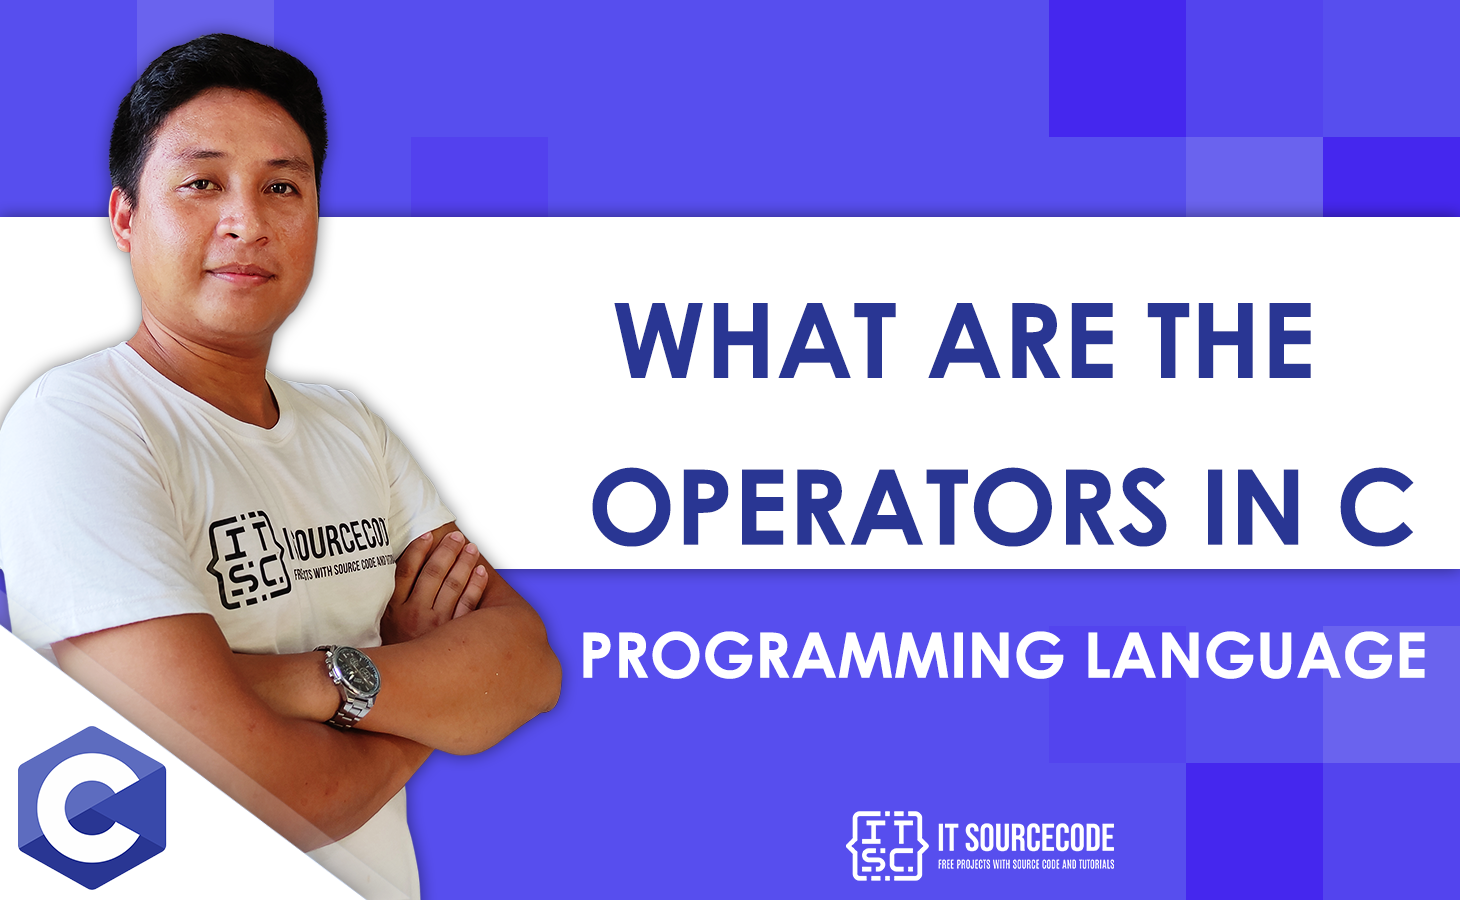 What are the Operators in C Programming Language